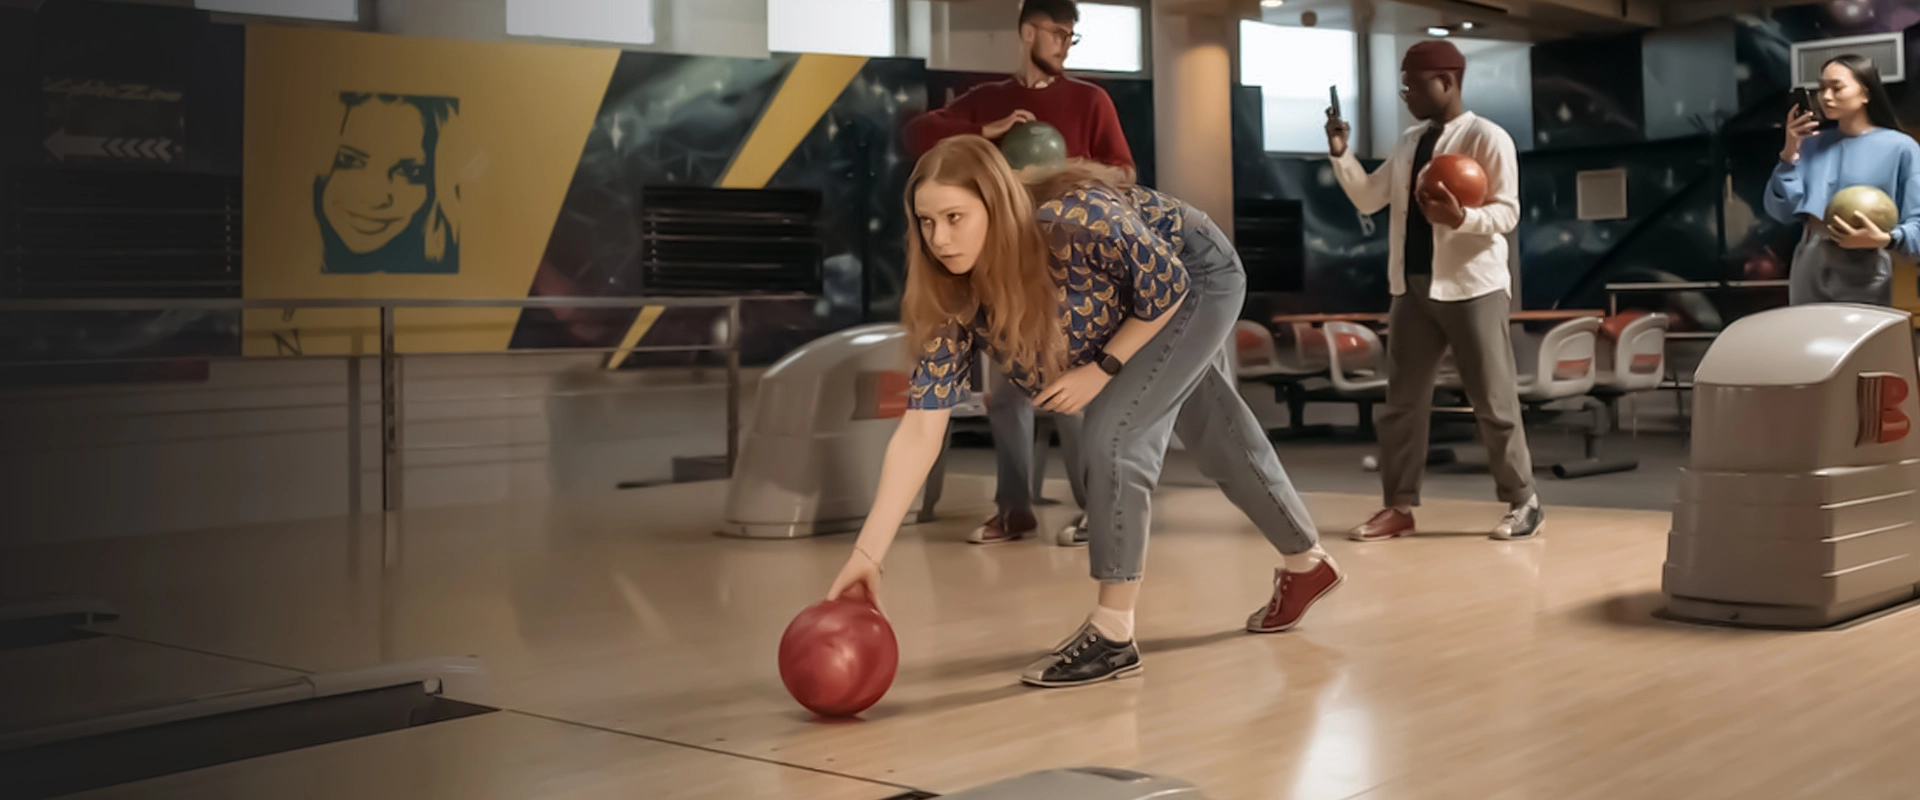 A young woman in jeans and a yellow shirt is bowling. She is holding the red bowling ball with both hands and is about to release it. There are three other people standing behind her, watching her bowl.